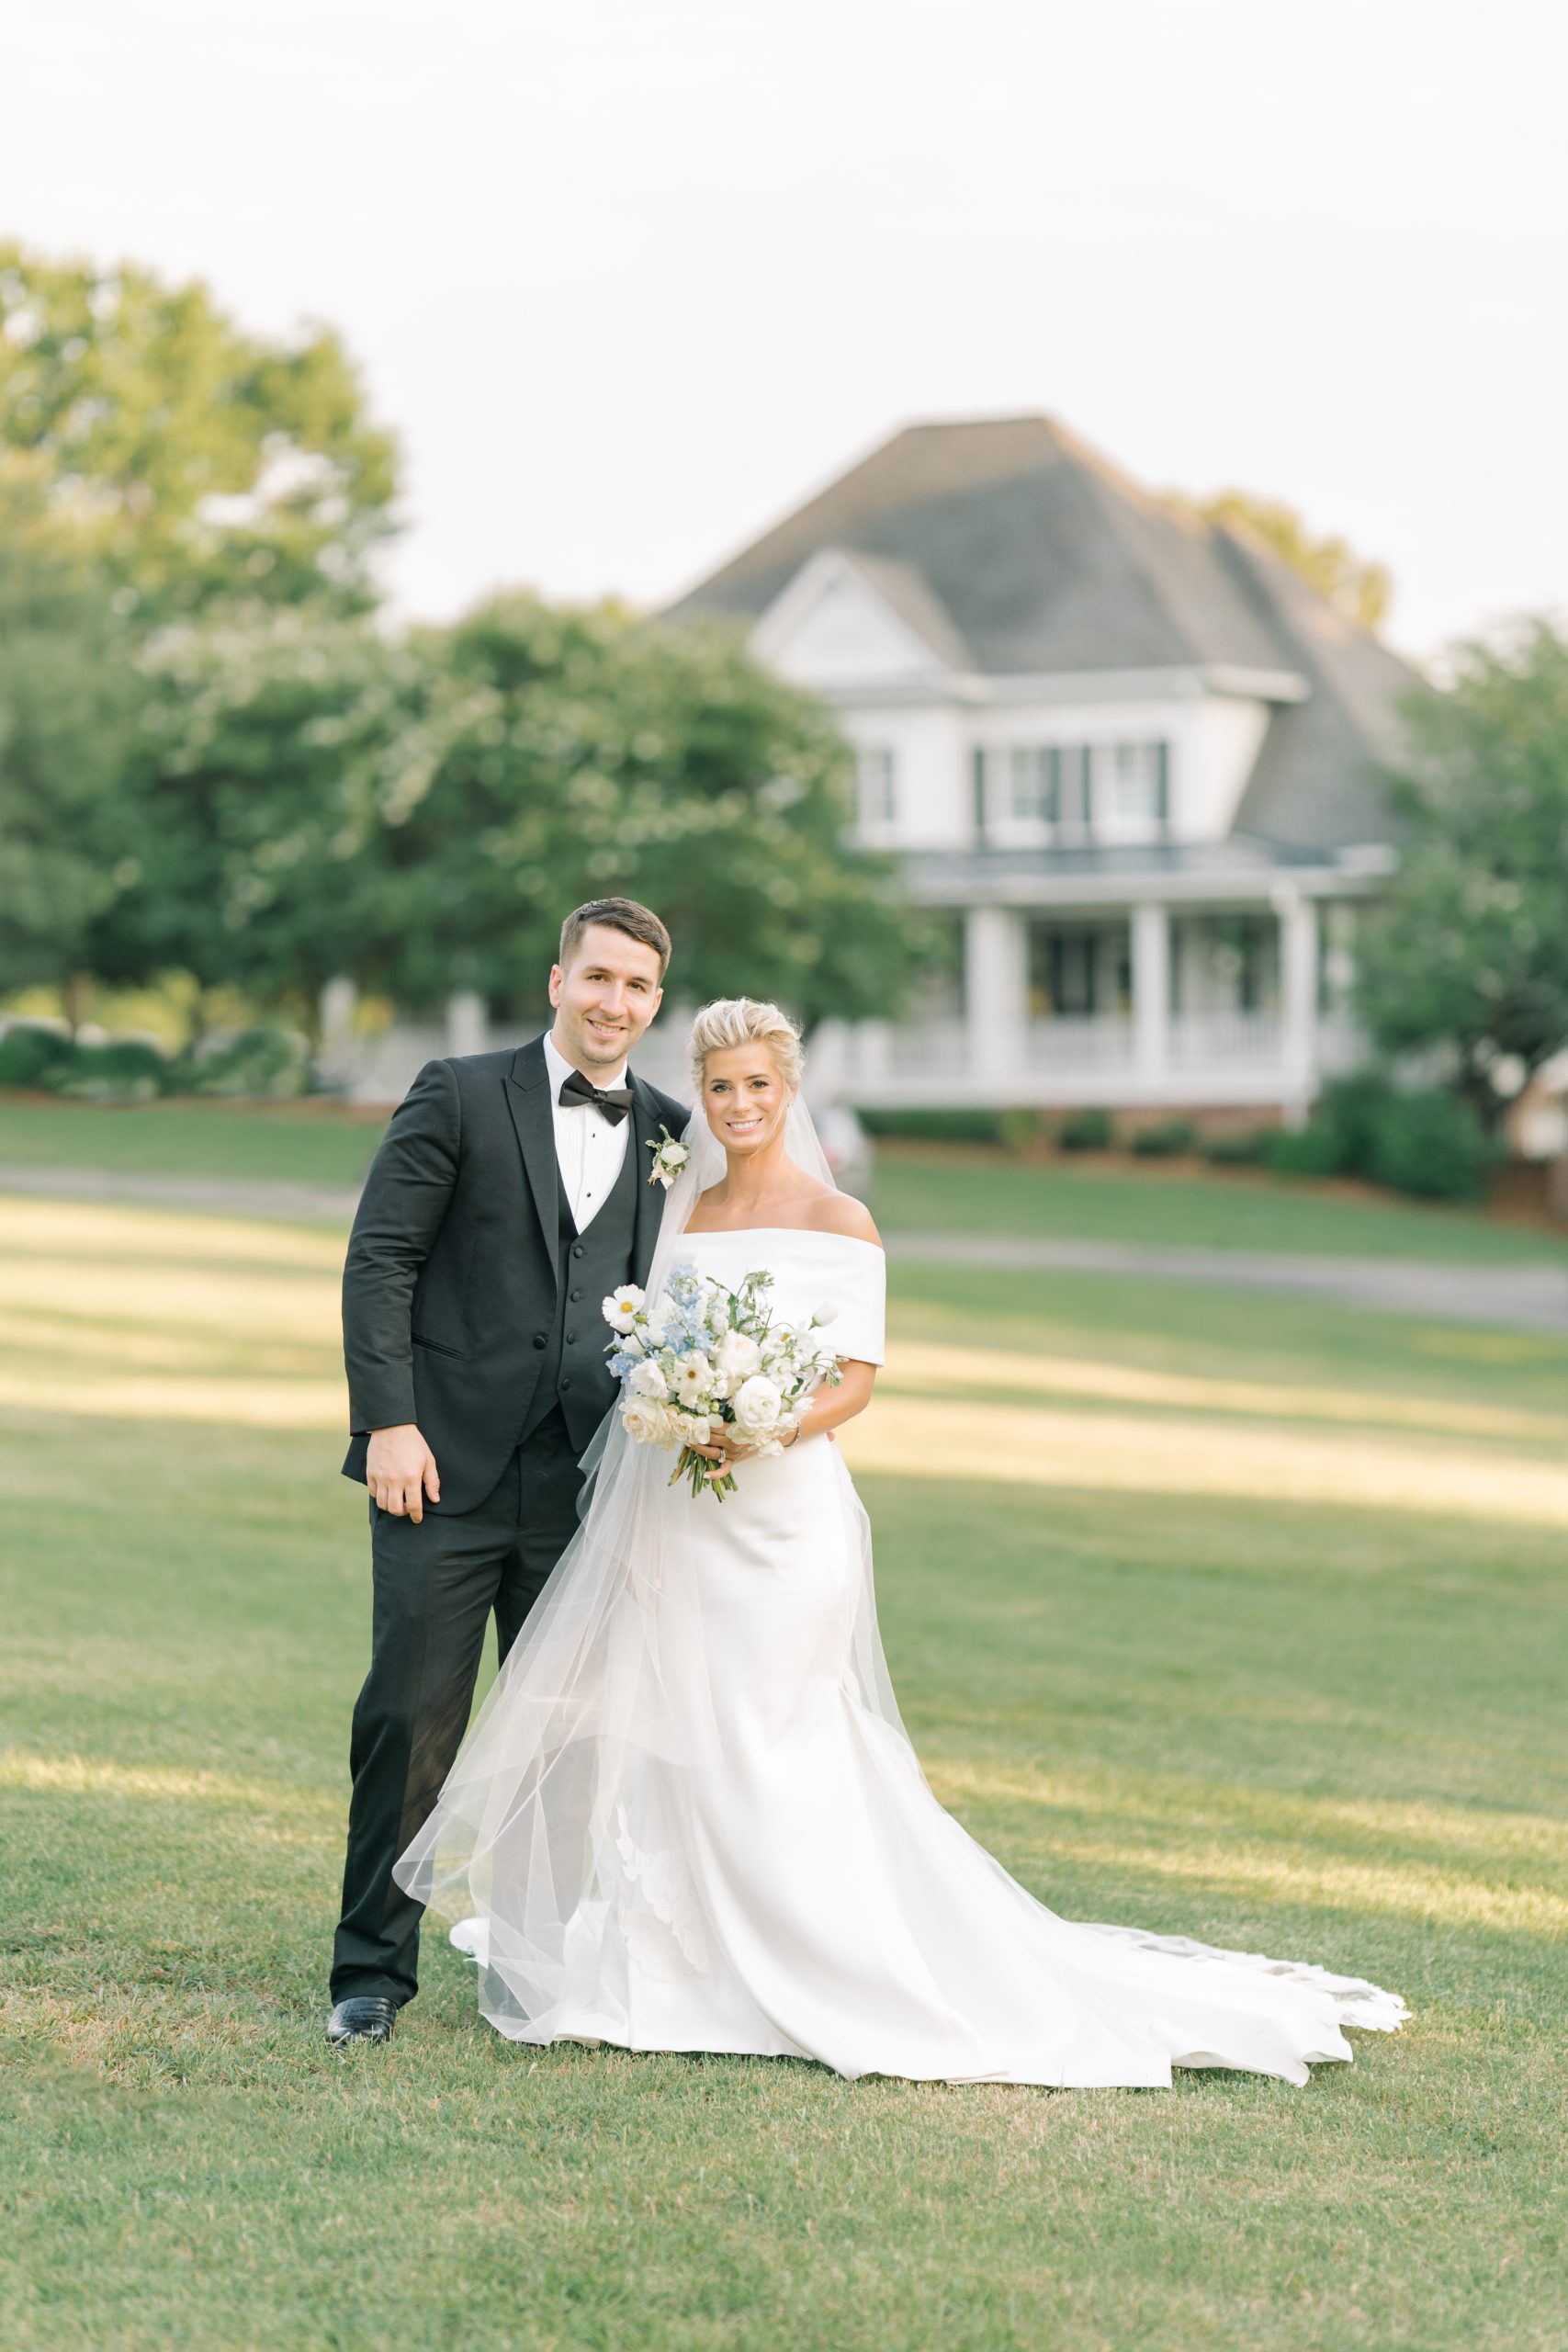 Kelli and Rodney’s daughter, Gabbie, was married to Nolan Villani at the family home in June.